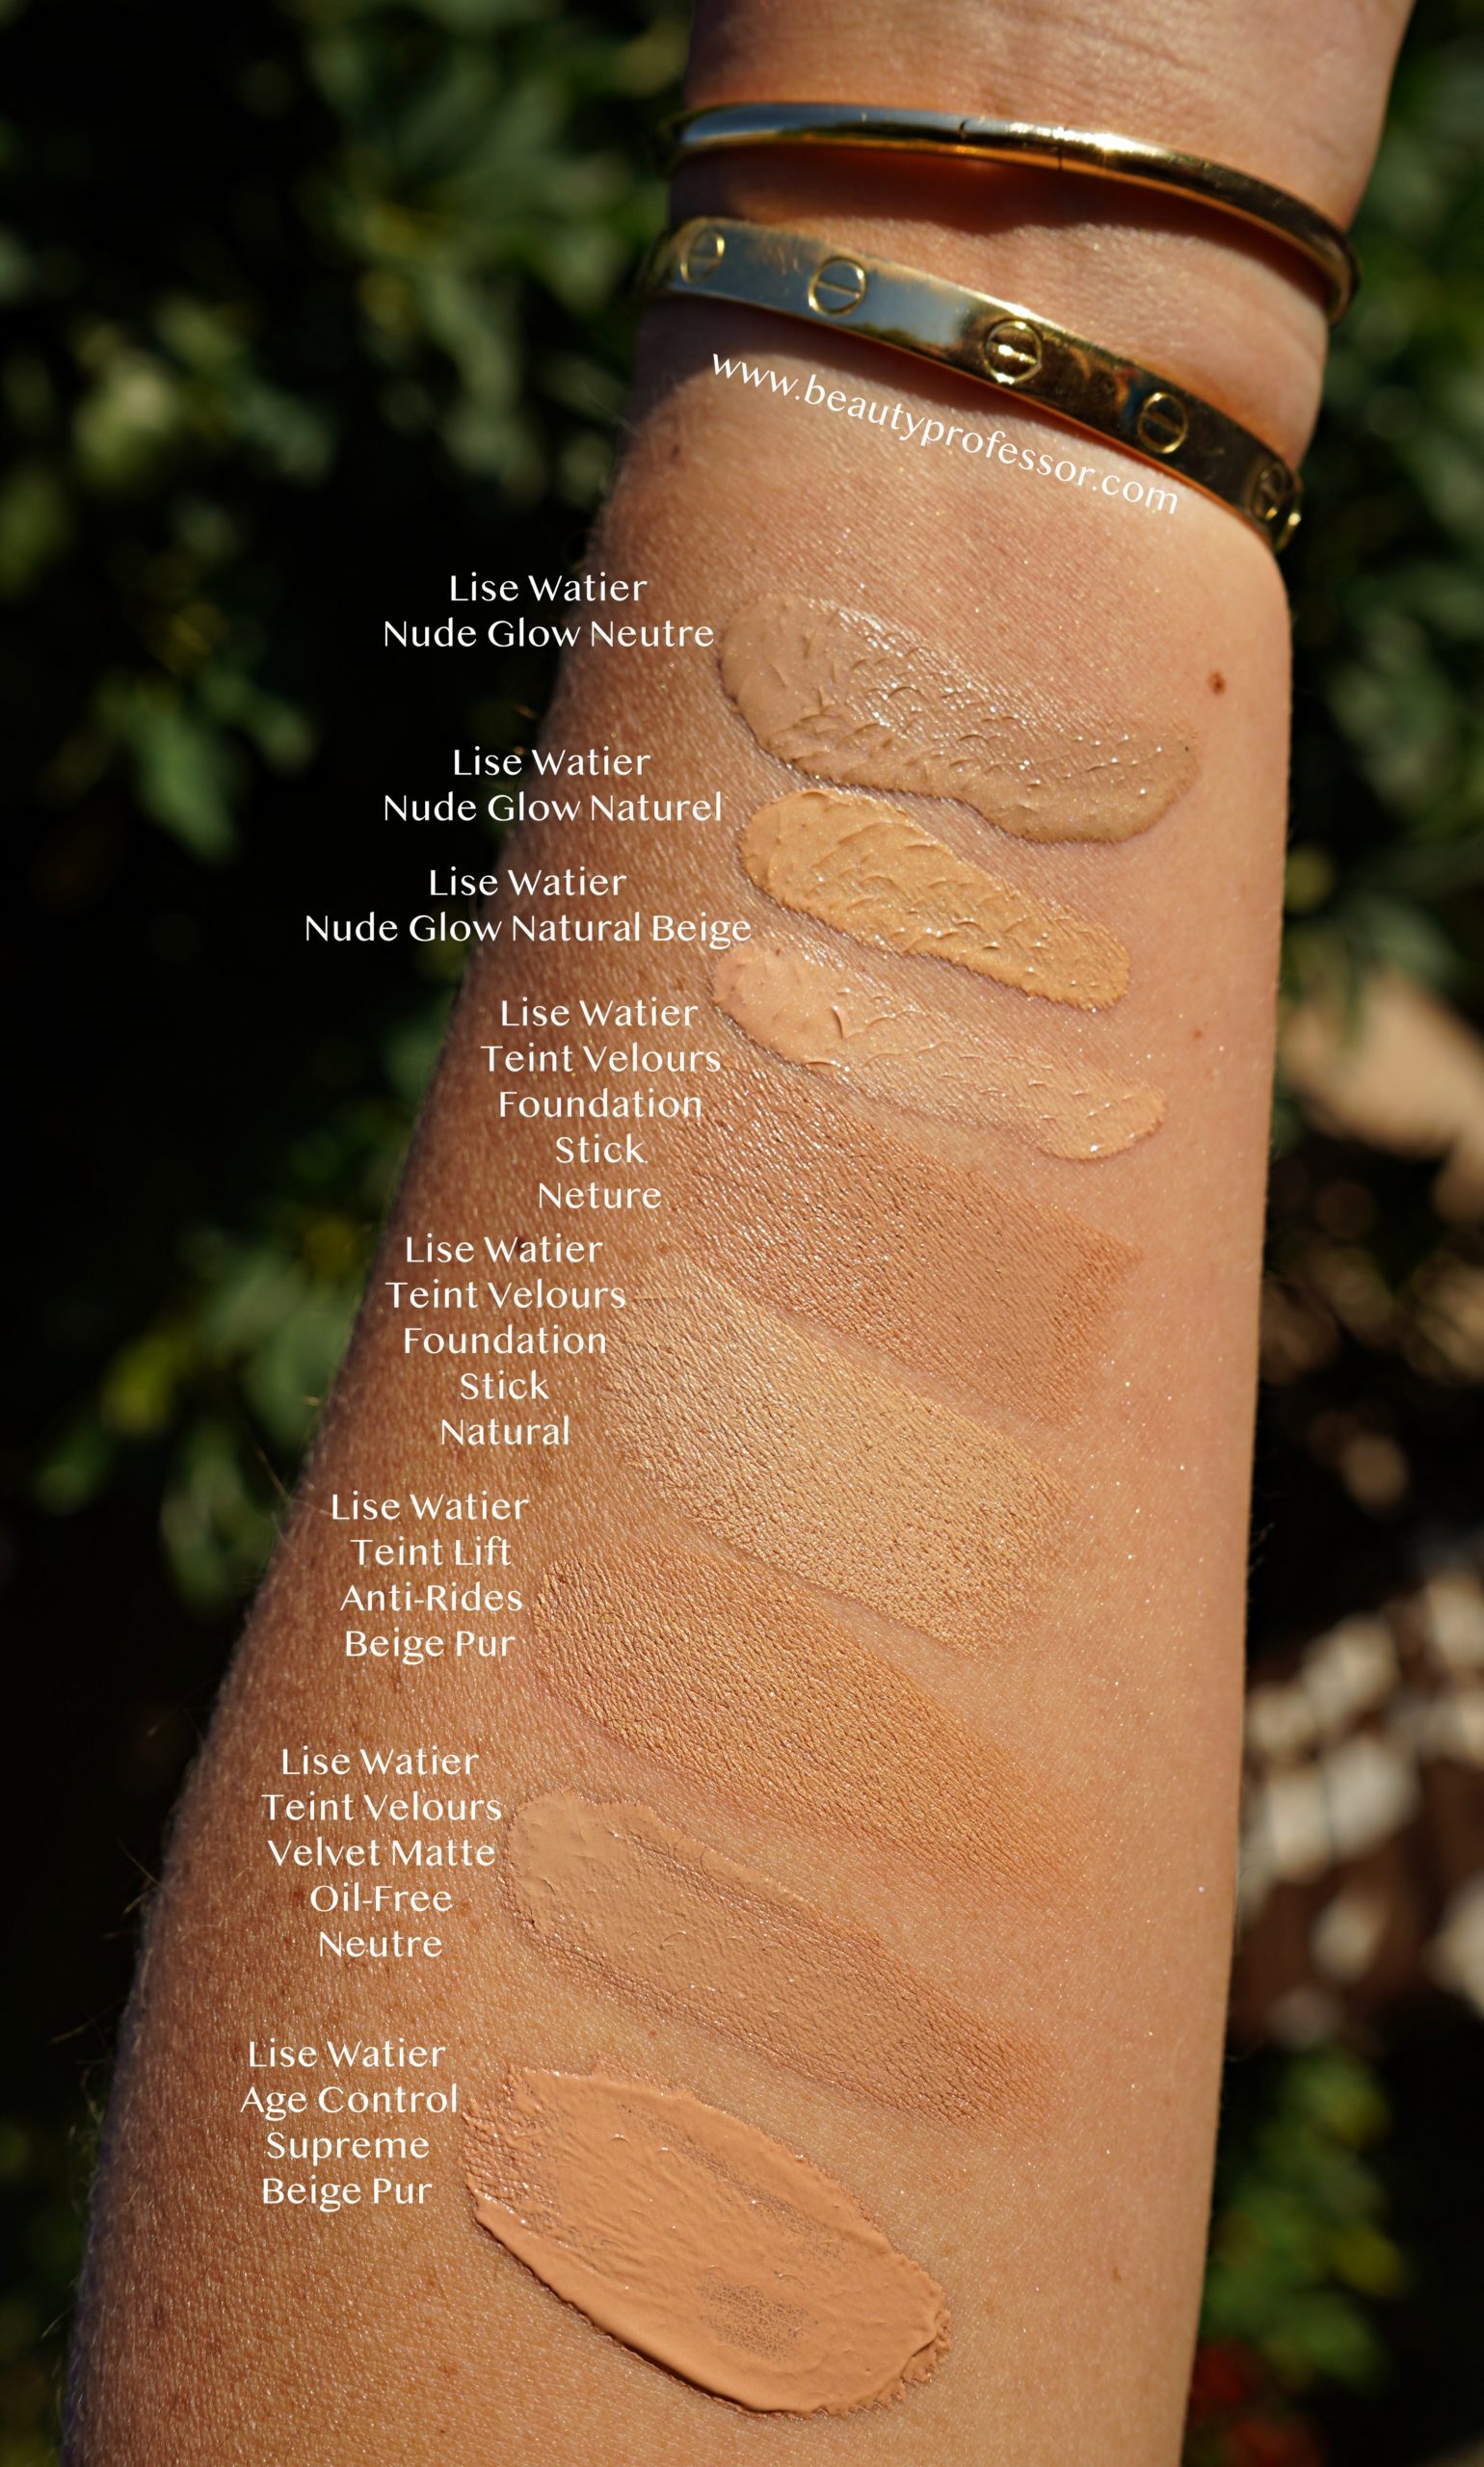 Lise Watier swatches in direct sunlight